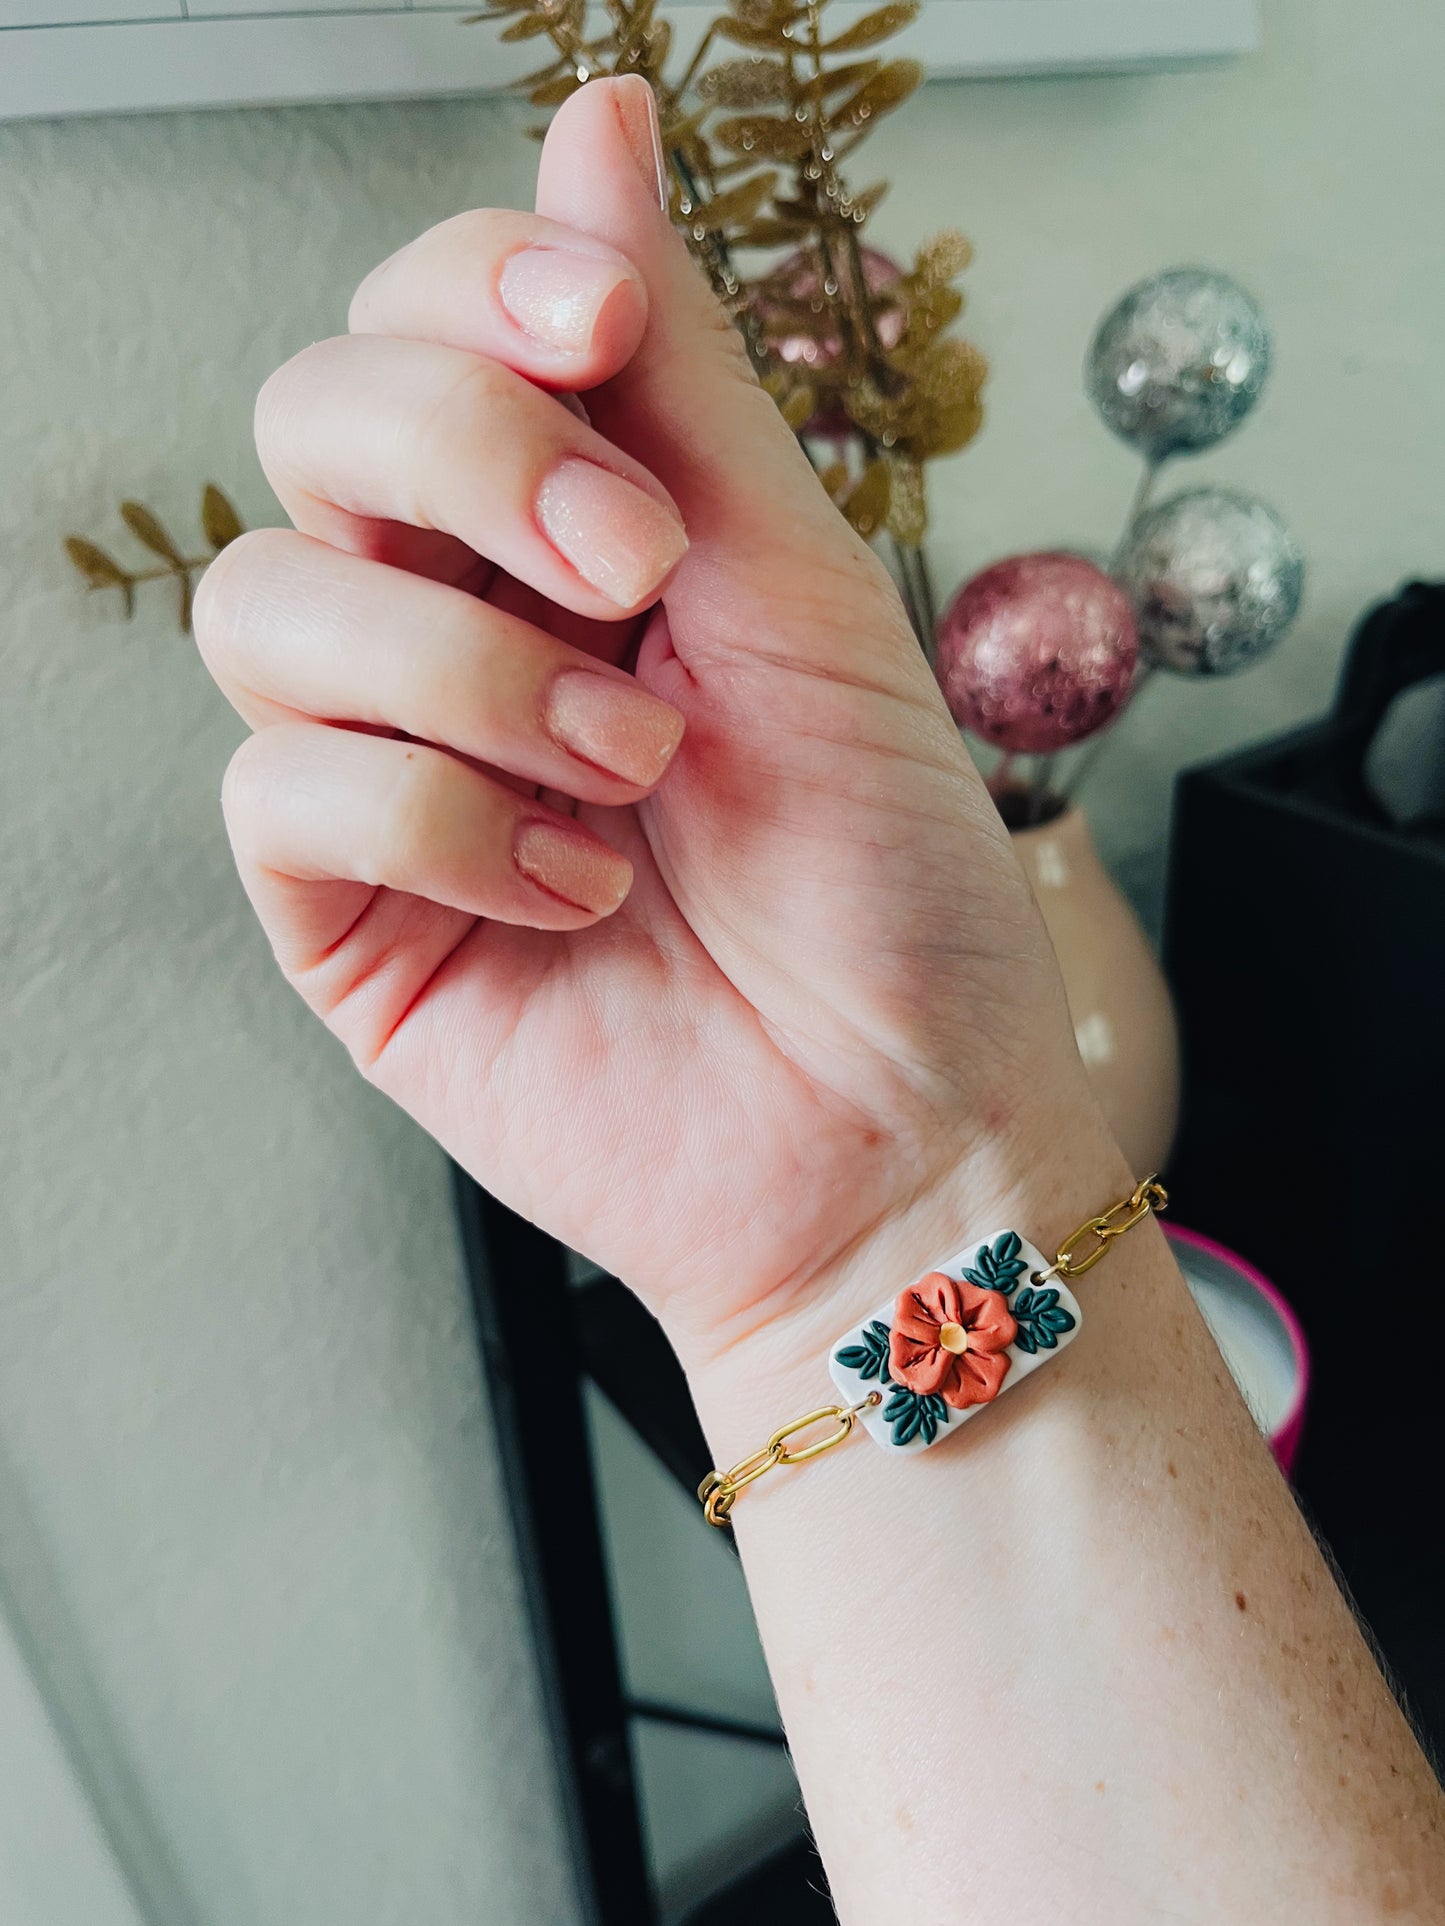 The Floral Clay Paperclip Bracelet